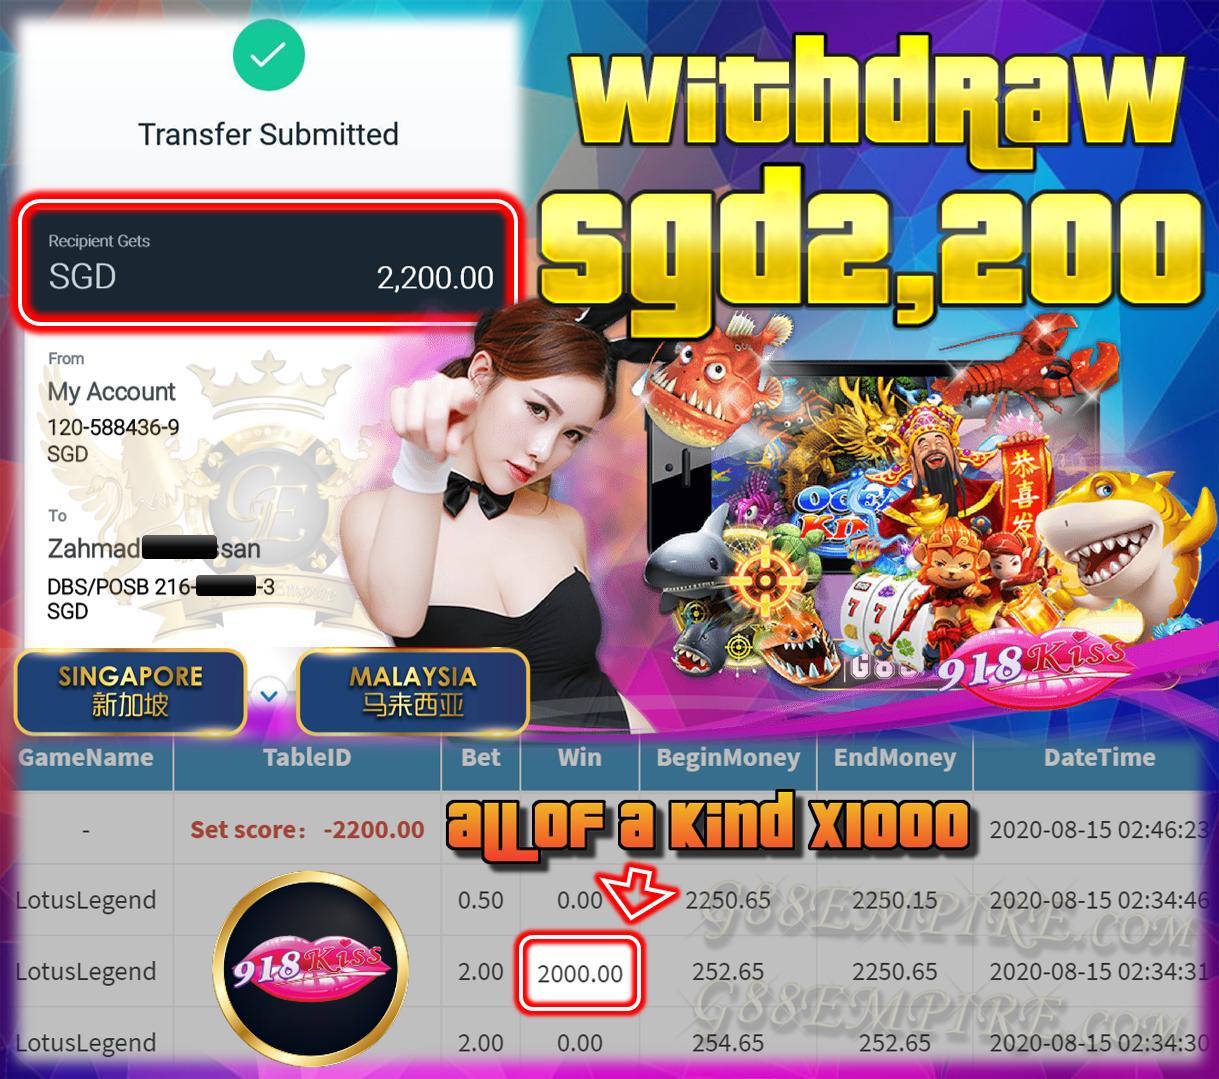 LOTUS LEGEND ALL OF A KIND X1000 WITHDRAW SGD2,200 !!